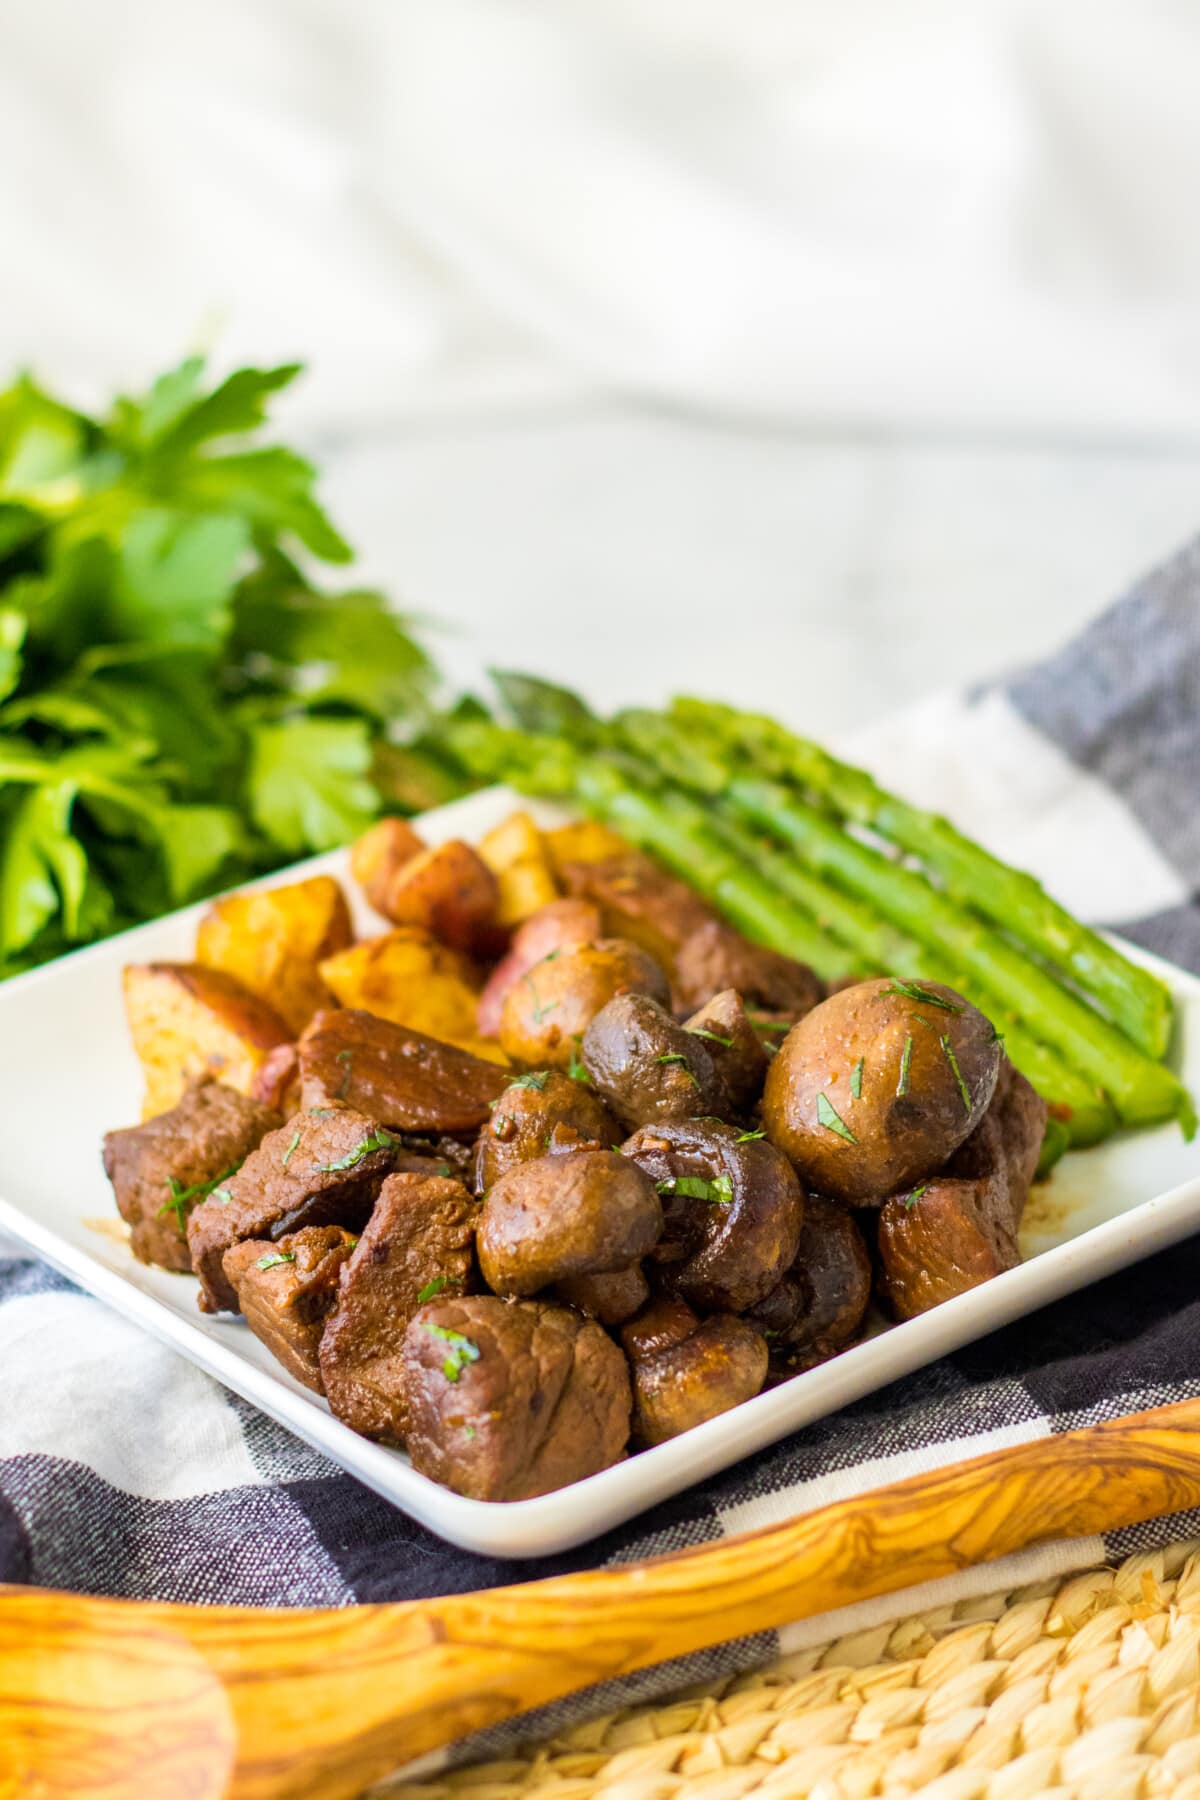 Crockpot Steak Bites with Mushrooms with a side of asparagus.